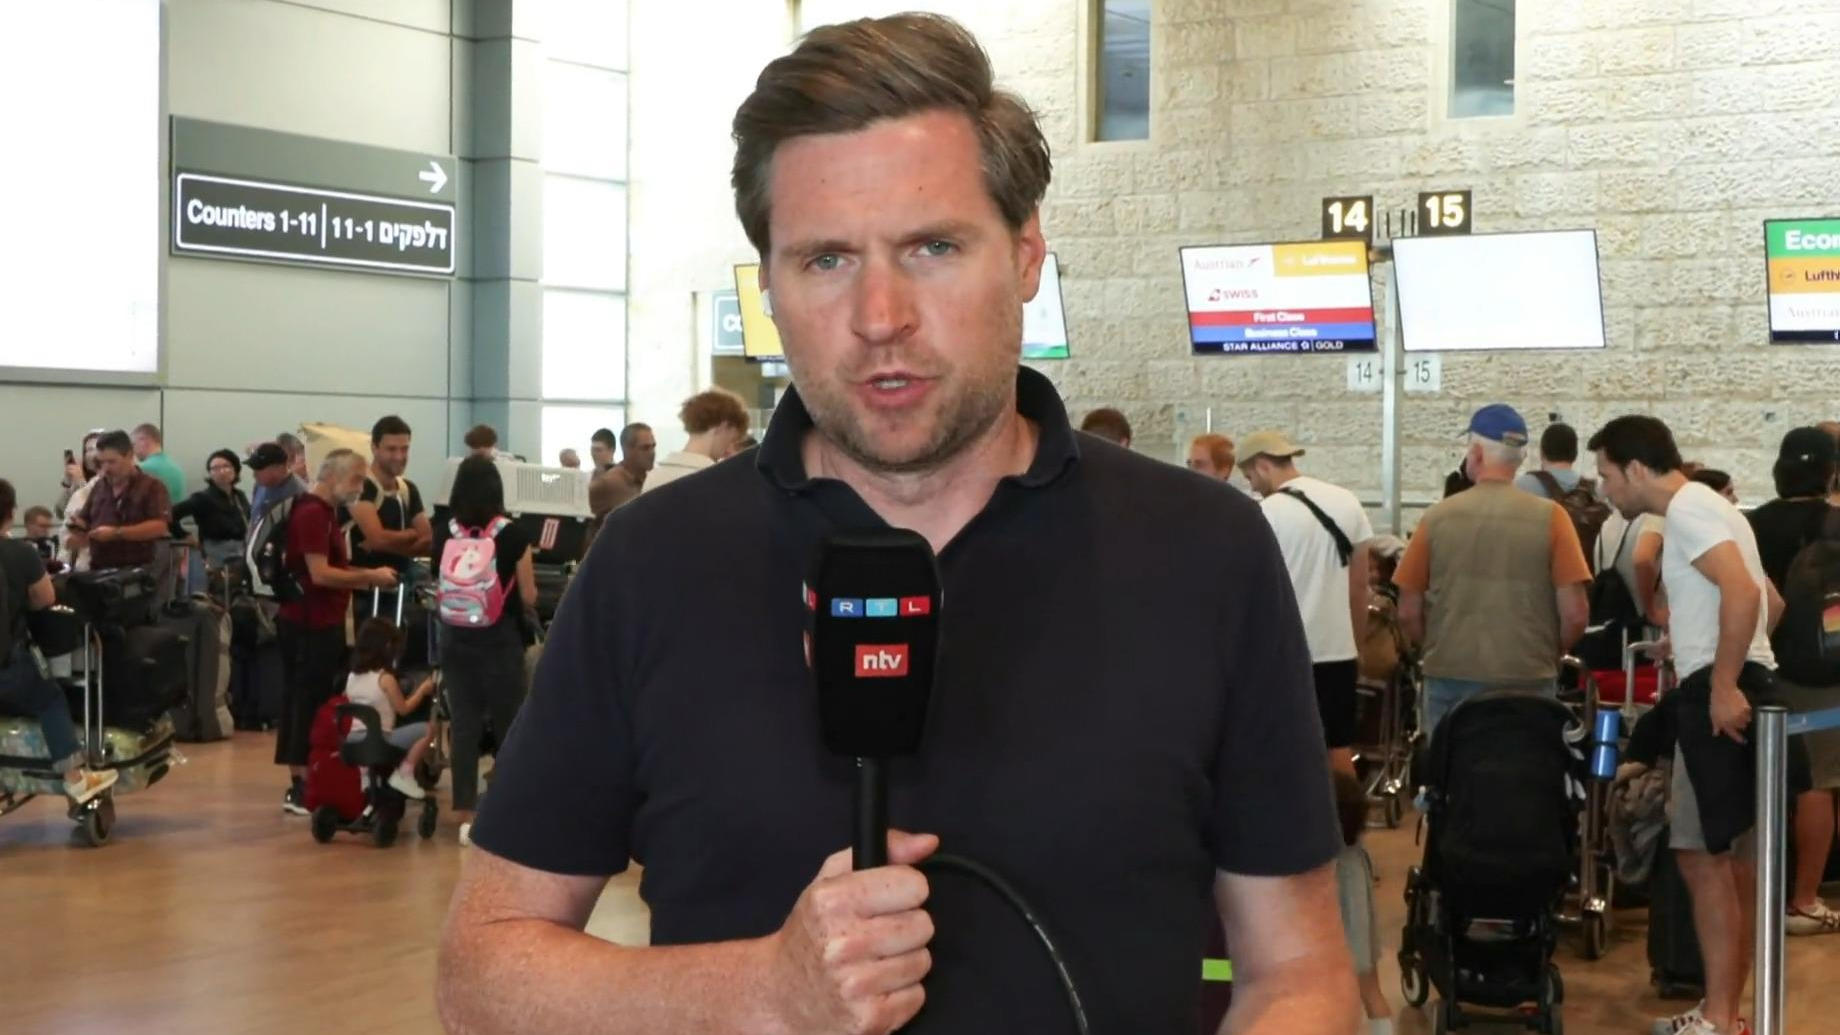 "No evacuation flights!  Flights that you pay for yourself" Gordian Fritz at Tel Aviv airport